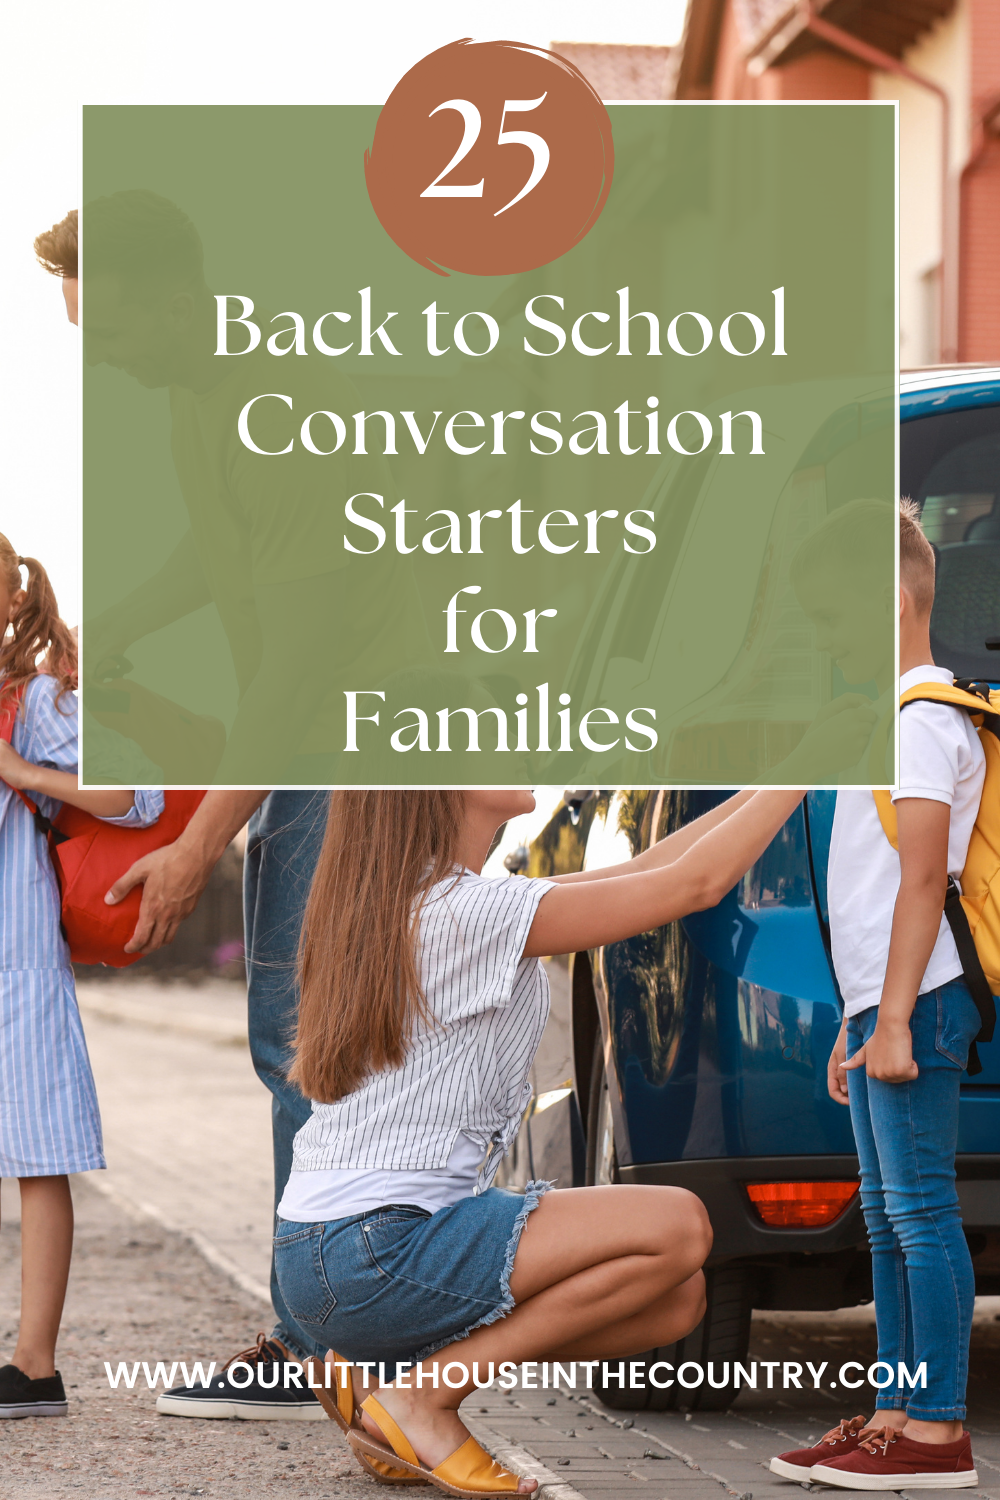 Back to School Conversation Starters for Families